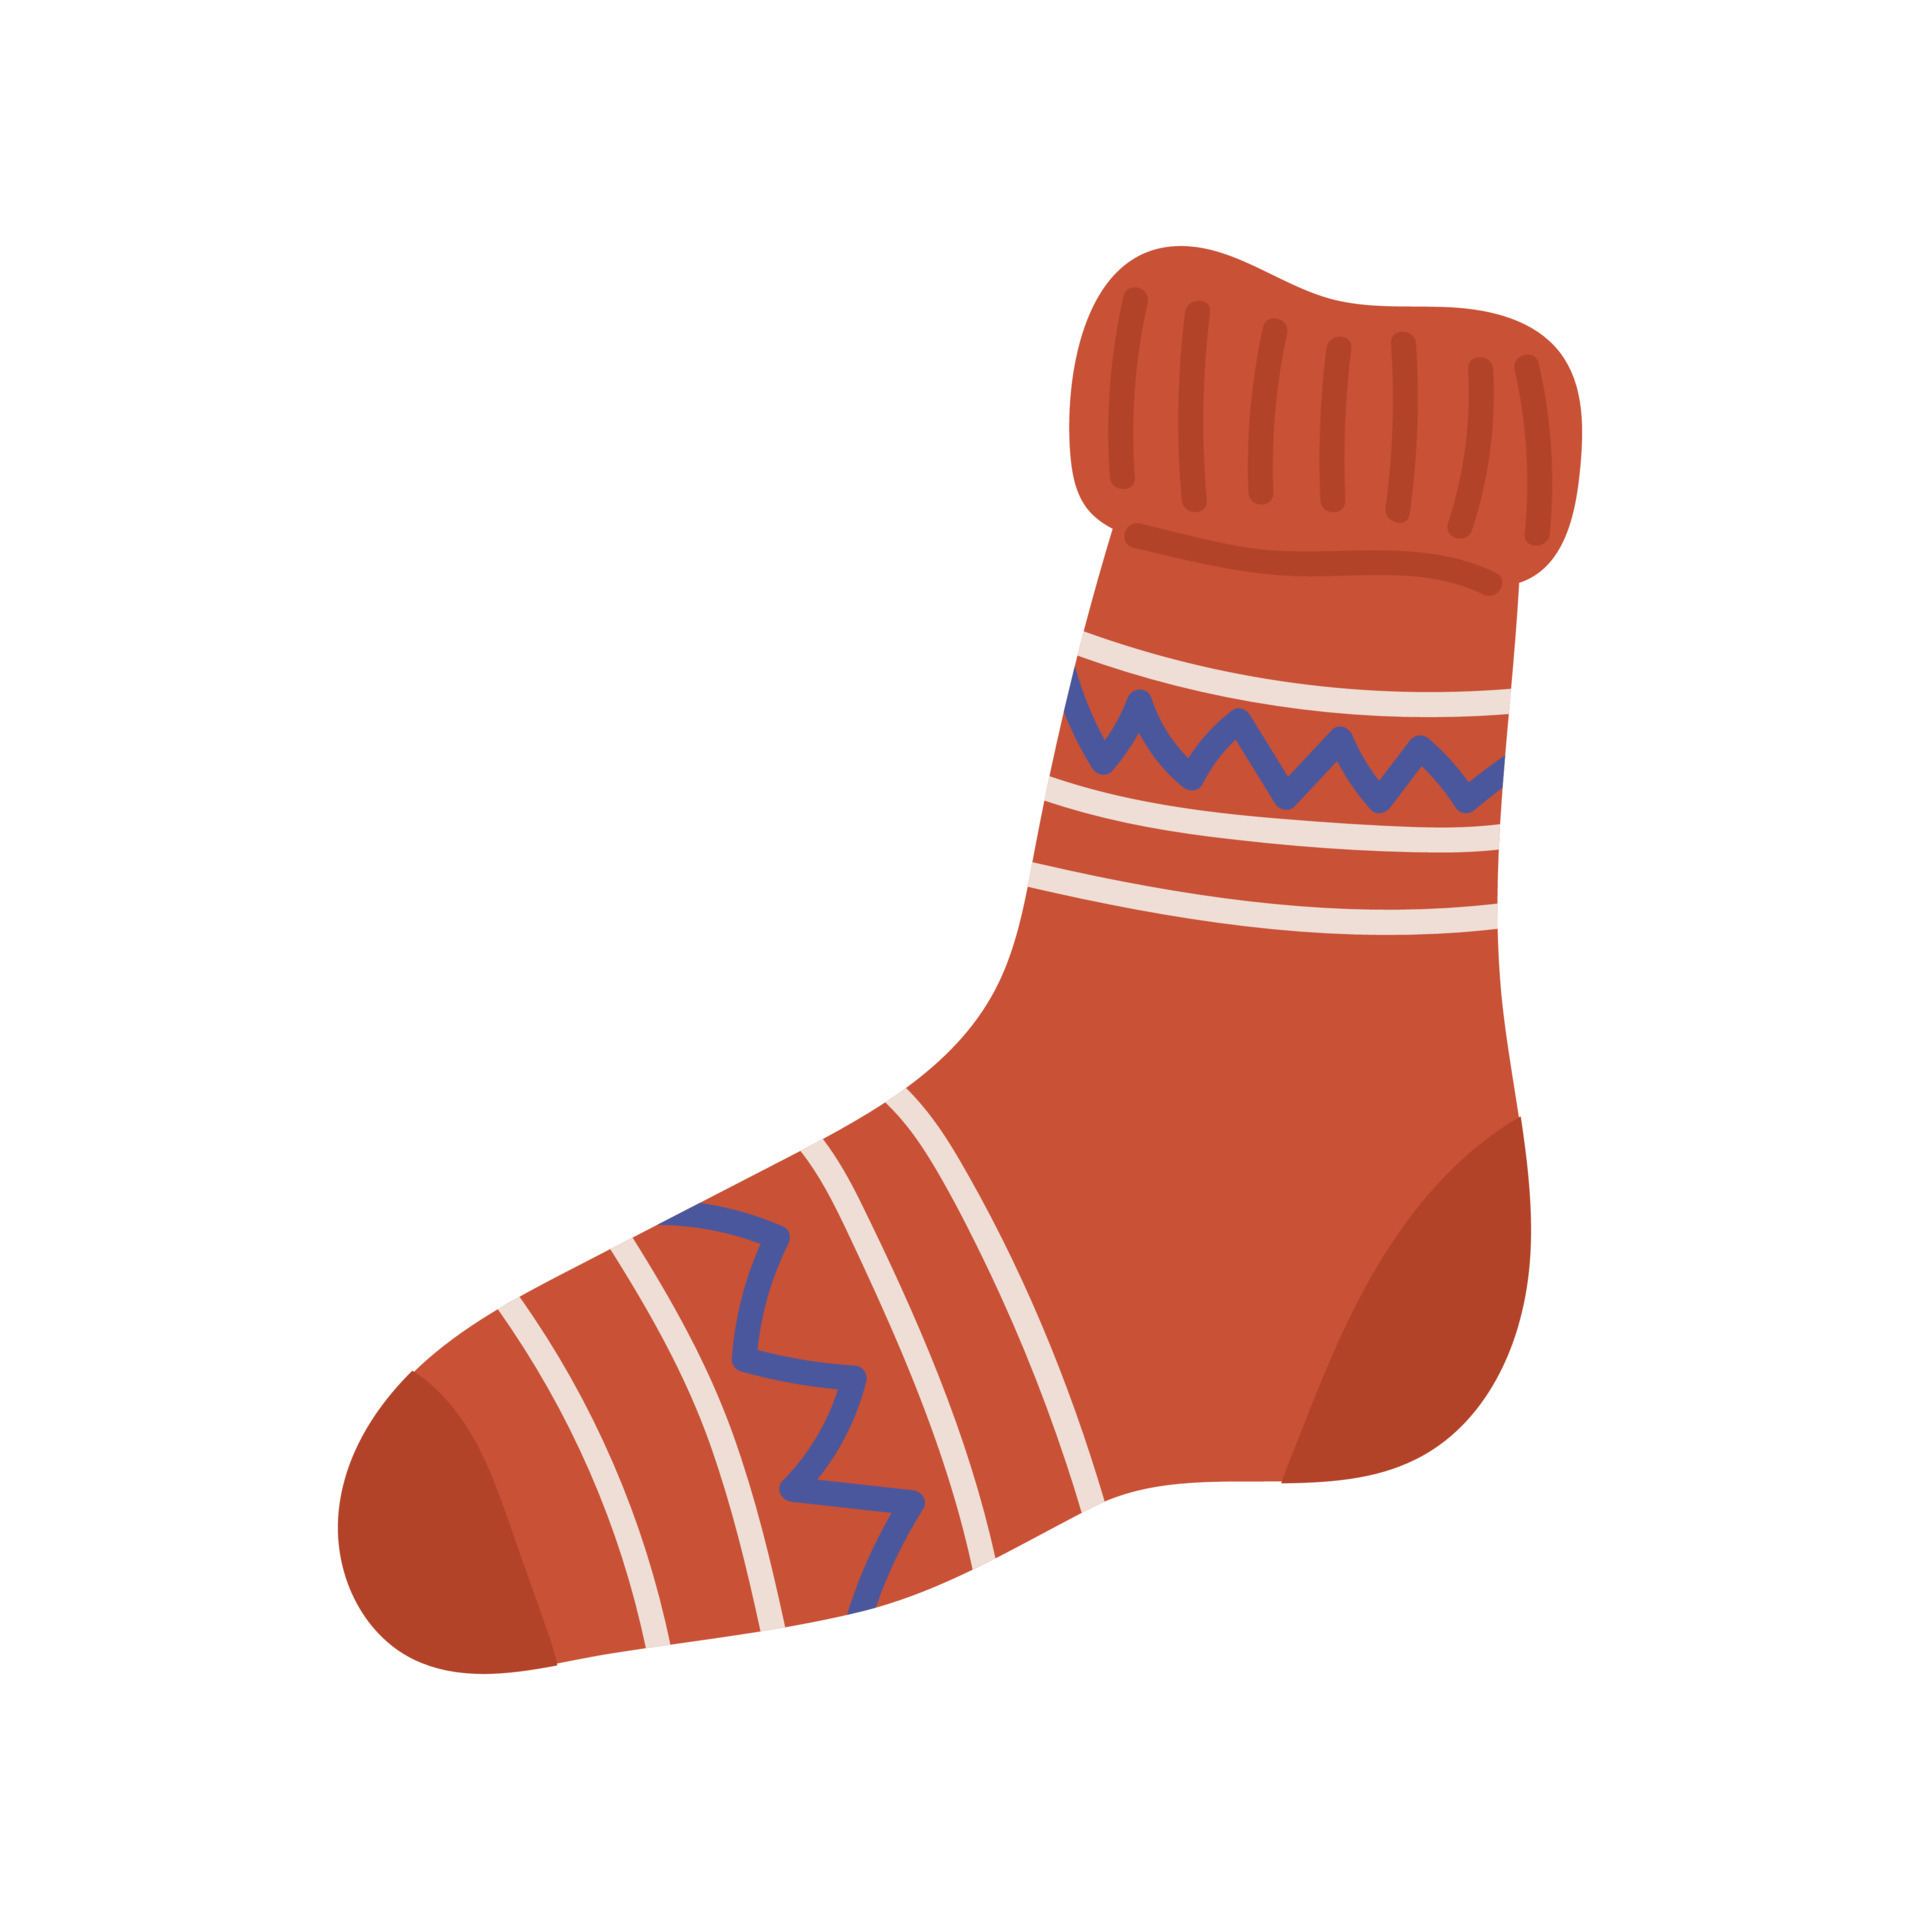 Knitted Sock Doodle style Cozy Autumn. Flat vector illustration 9749792 ...